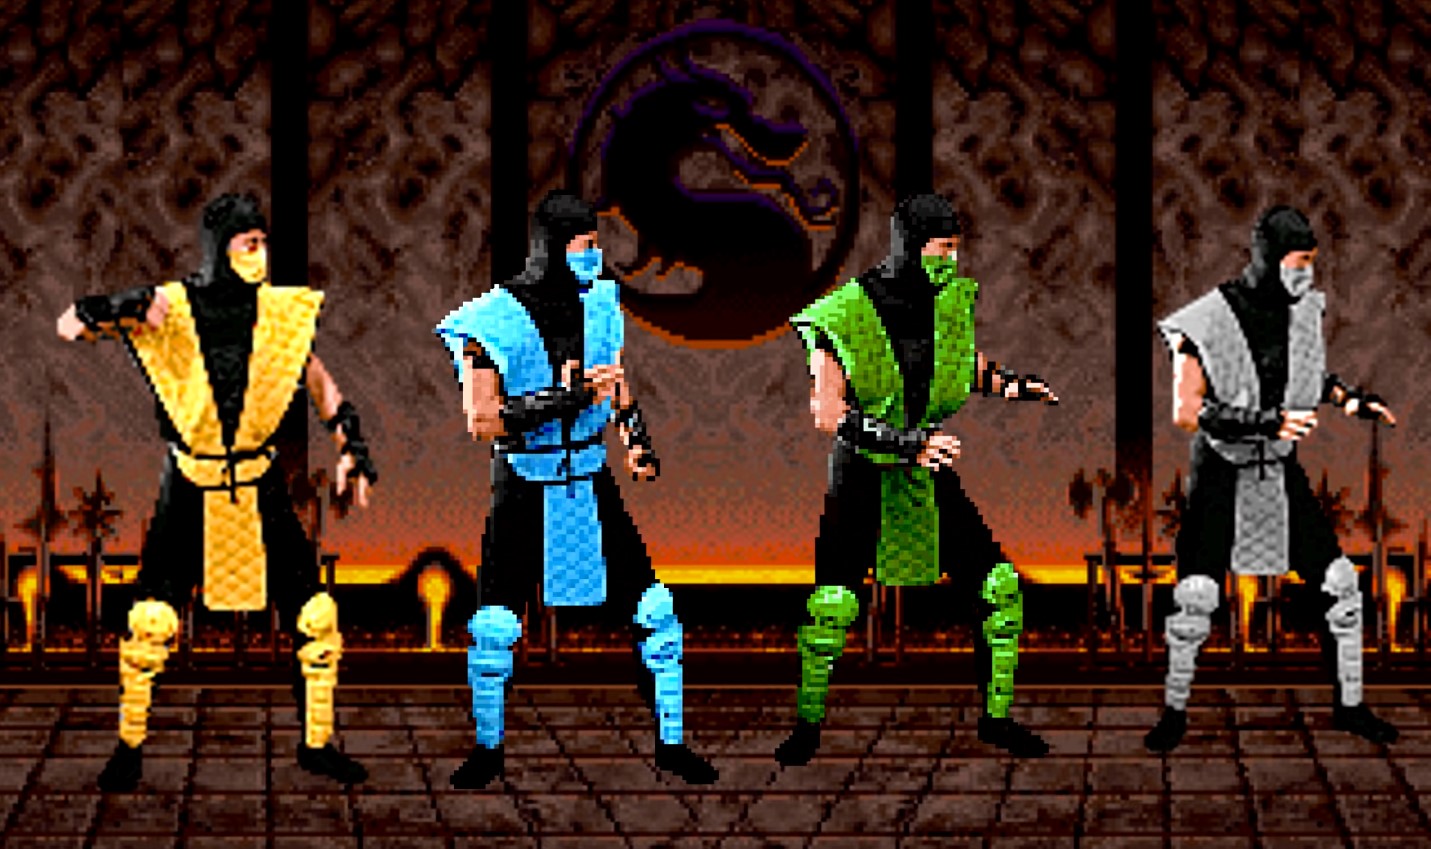 30 years of Mortal Kombat: censorship in video games and what the fighting game is known for